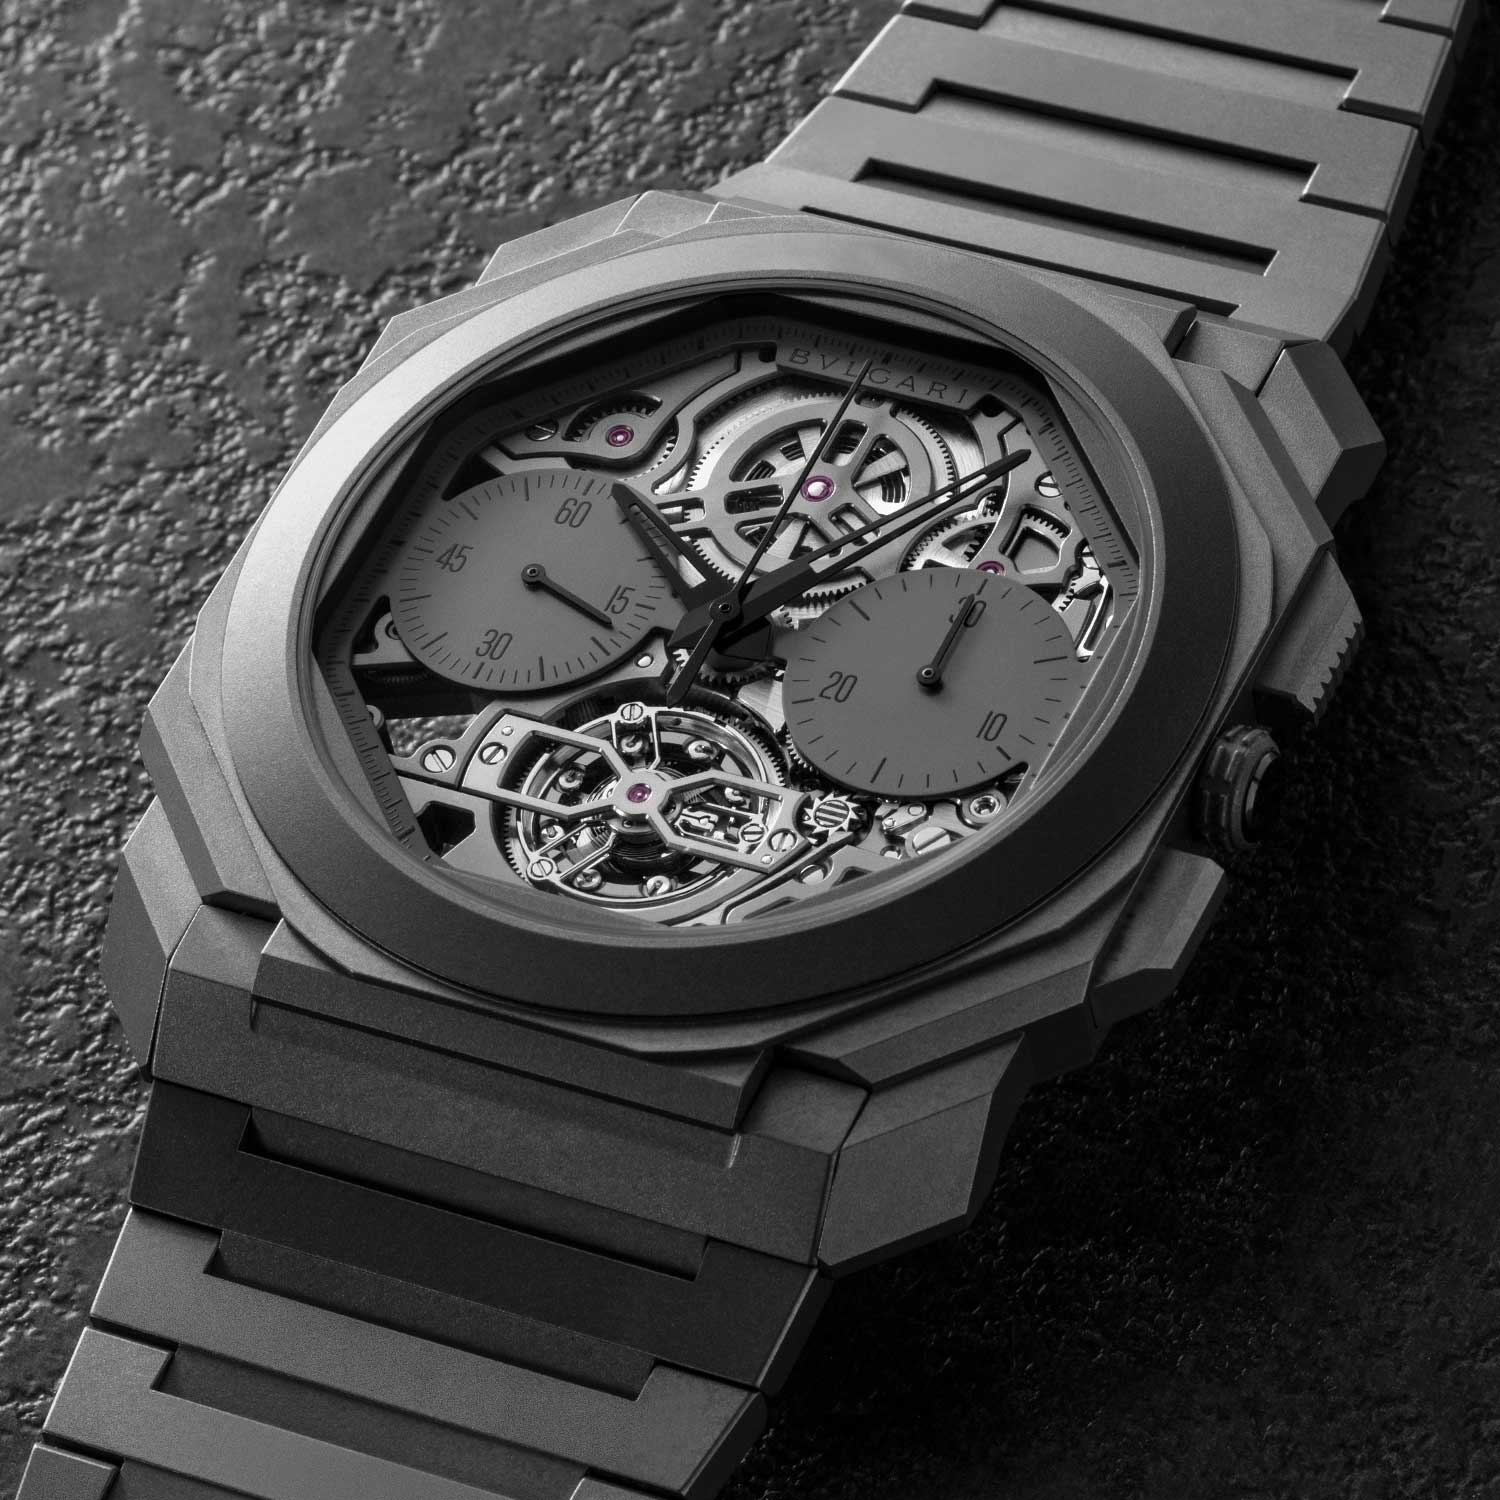 2020: Octo Finissimo Tourbillon Chronograph Skeleton Automatic At just 3.50mm thick, the new Octo Finissimo Tourbillon Chronograph Automatic movement claims a new watch industry record for the sixth time. The watch features Bvlgari’s record breaking chronograph, now in a two-counter display, as well as a tourbillon at six o’clock. The dial is skeletonised to fully show the complexity of the BVL 388 caliber from the front.